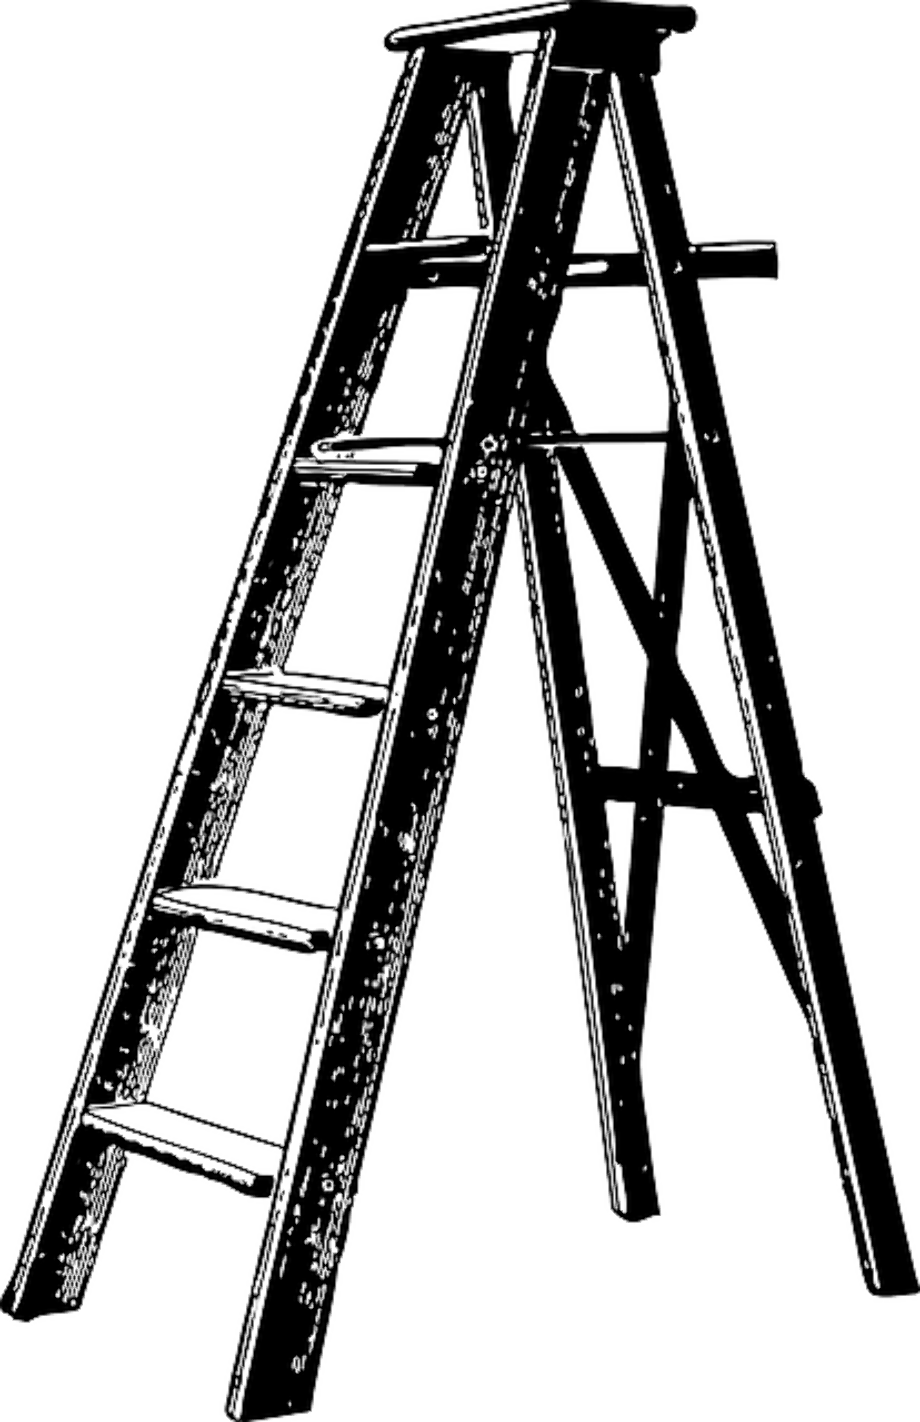 ladder clipart silhouette